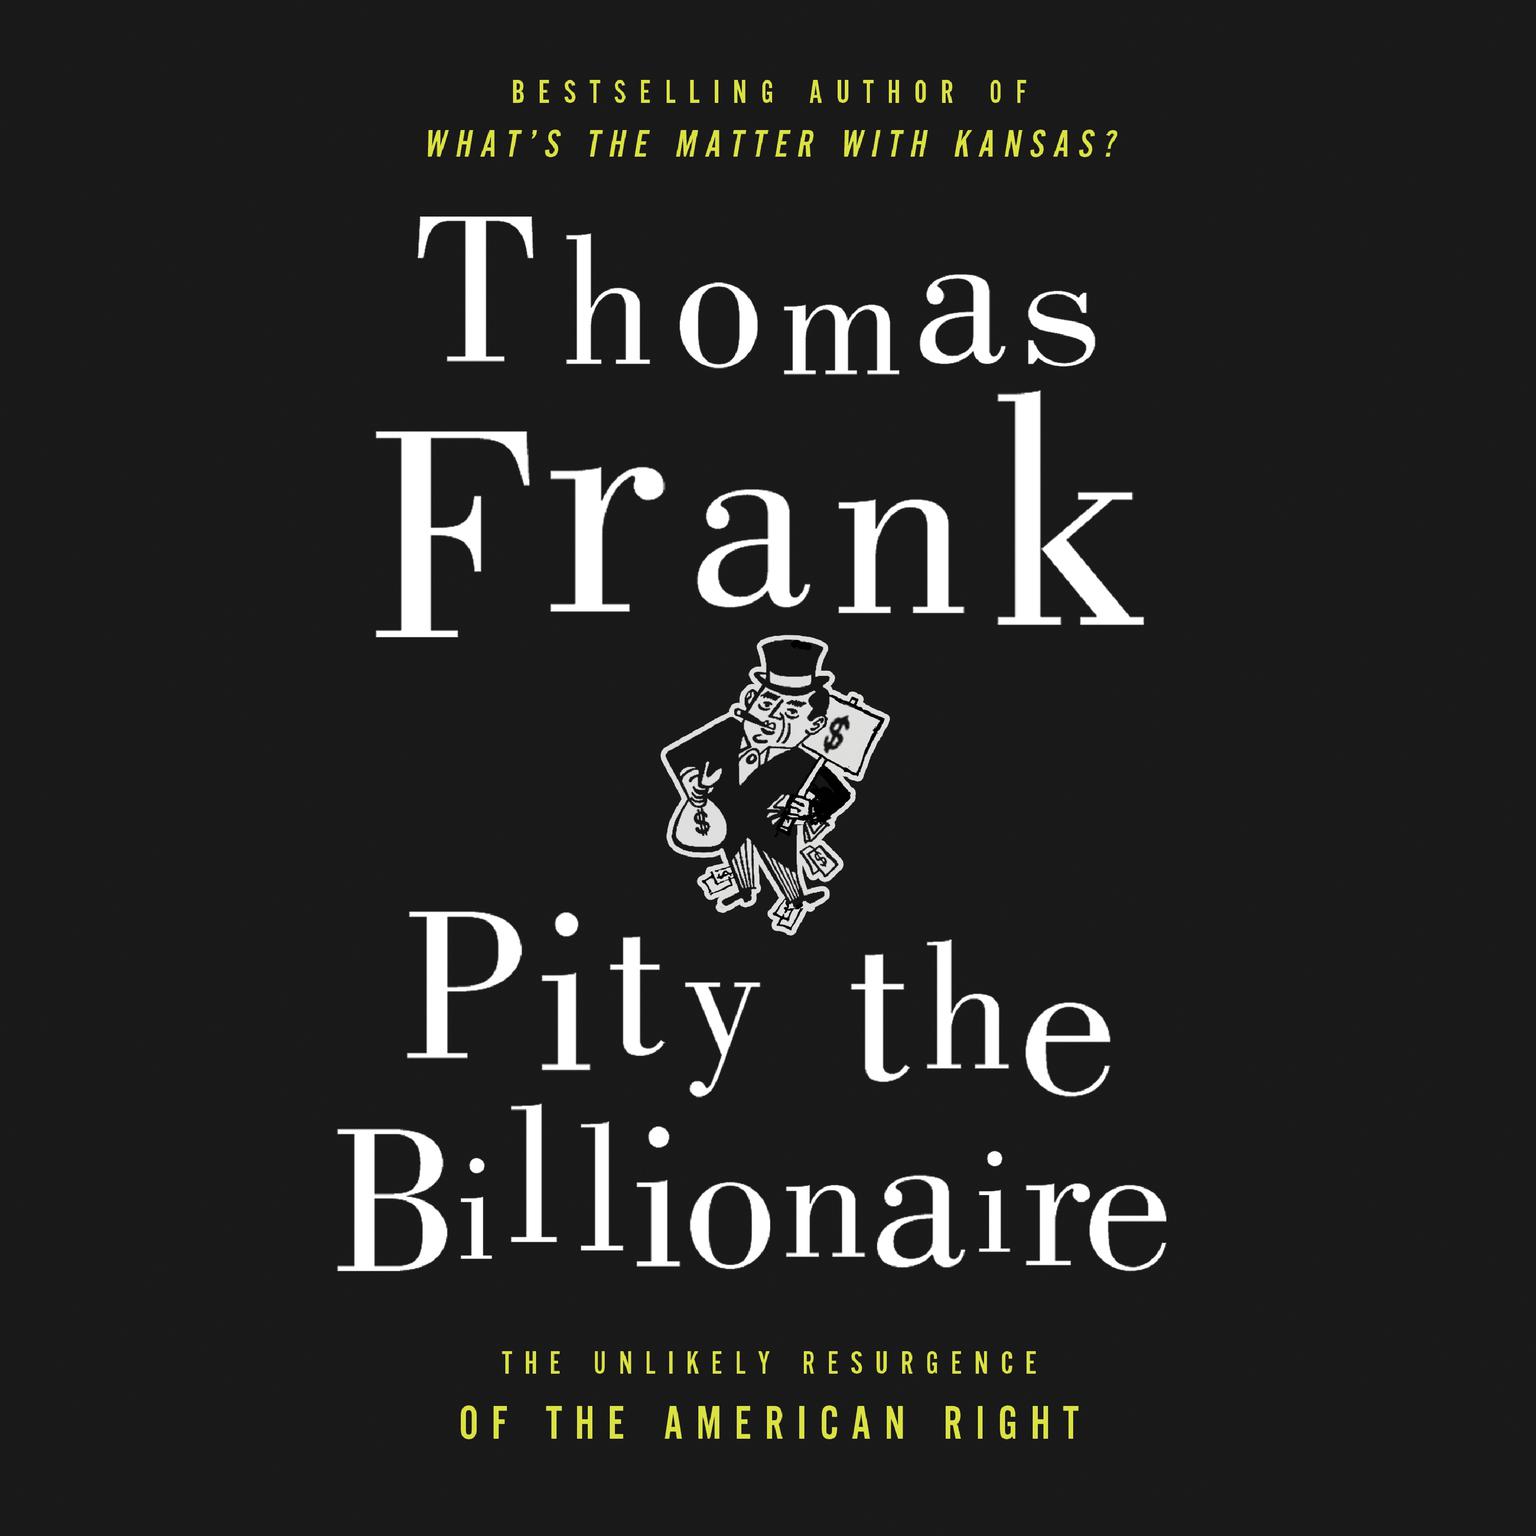 Pity the Billionaire: The Hard-Times Swindle and the Unlikely Comeback of the Right Audiobook, by Thomas Frank